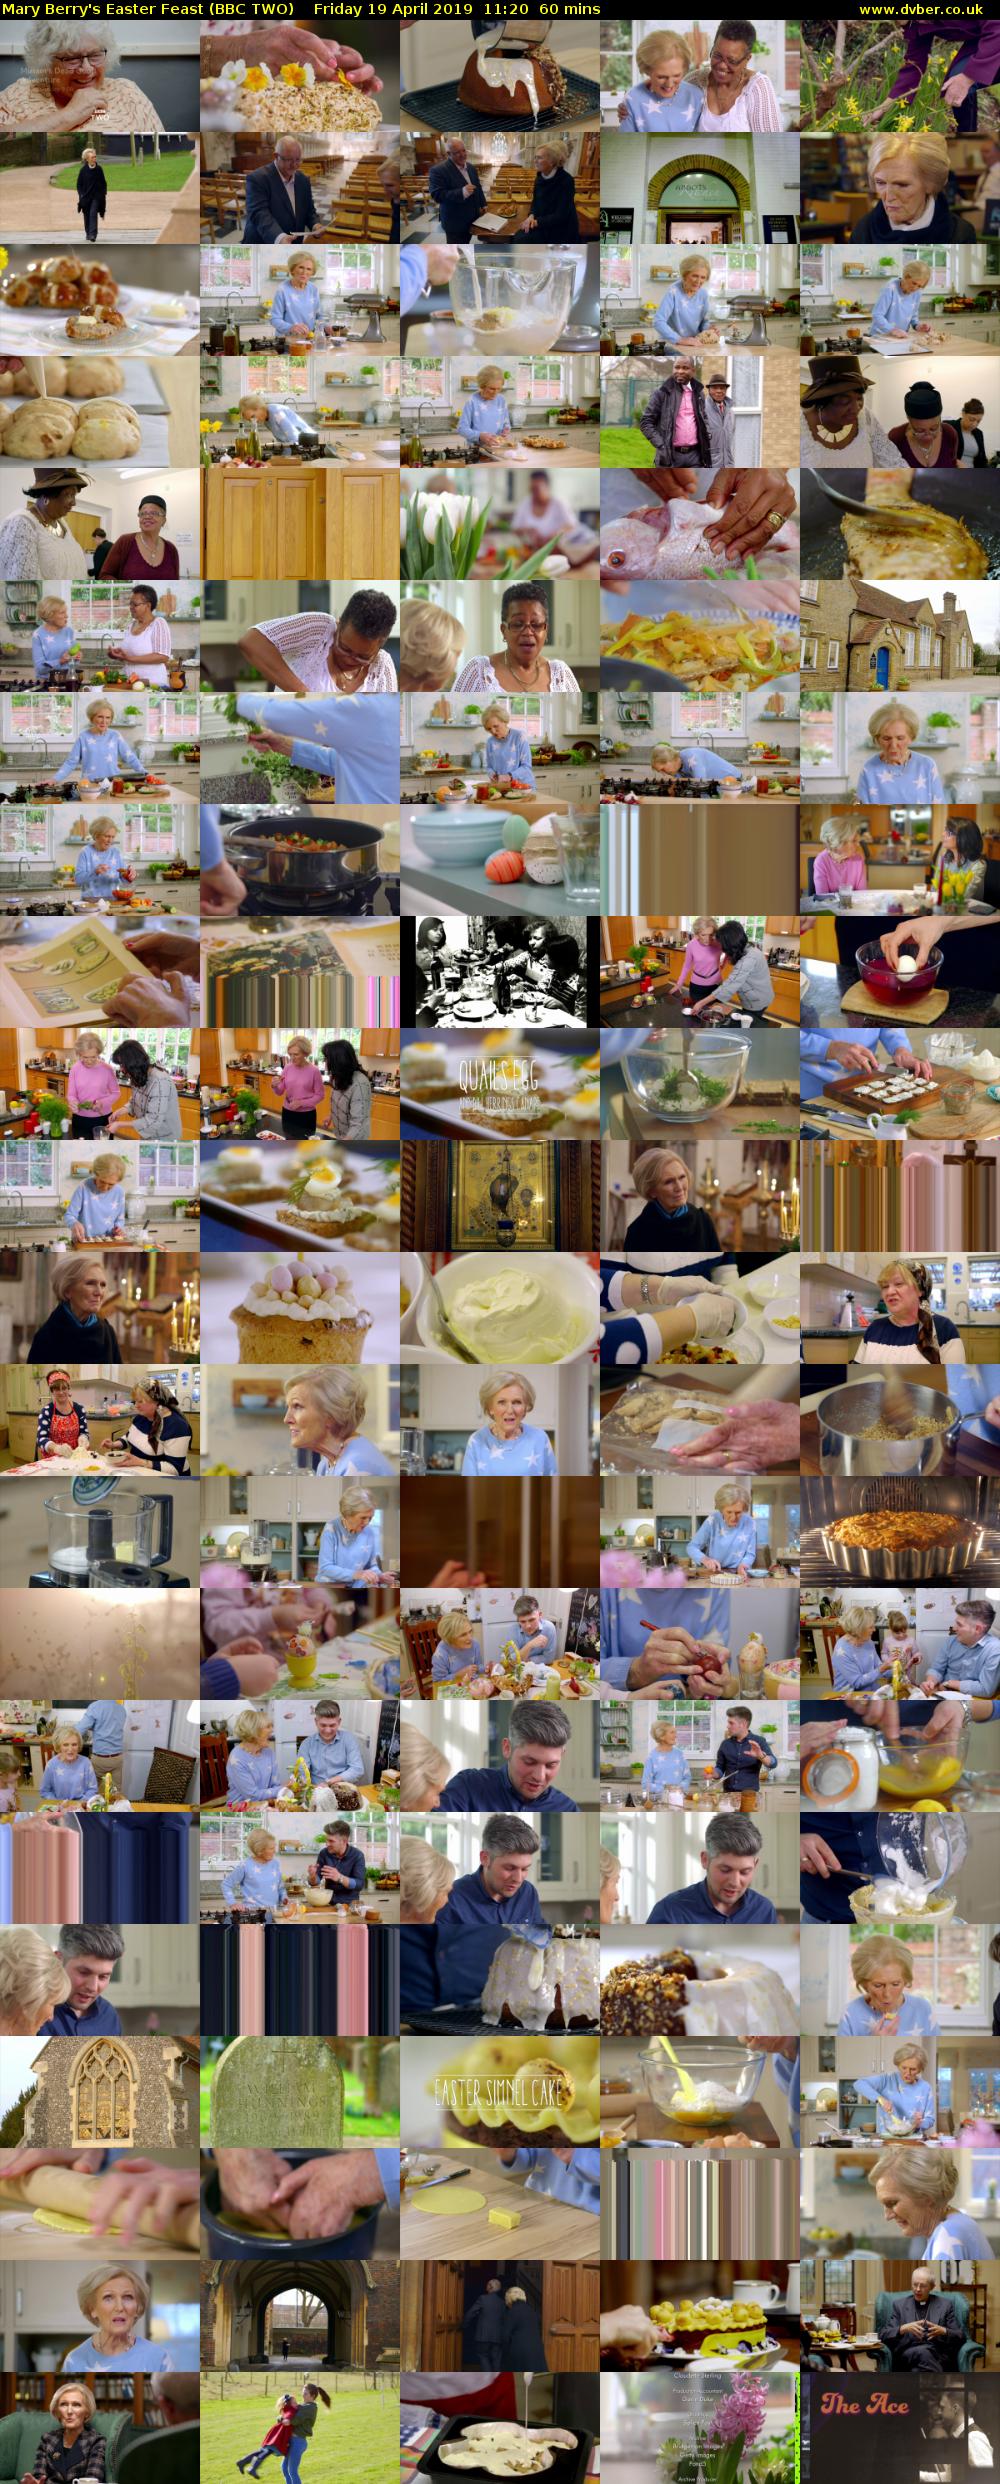 Mary Berry's Easter Feast (BBC TWO) Friday 19 April 2019 11:20 - 12:20